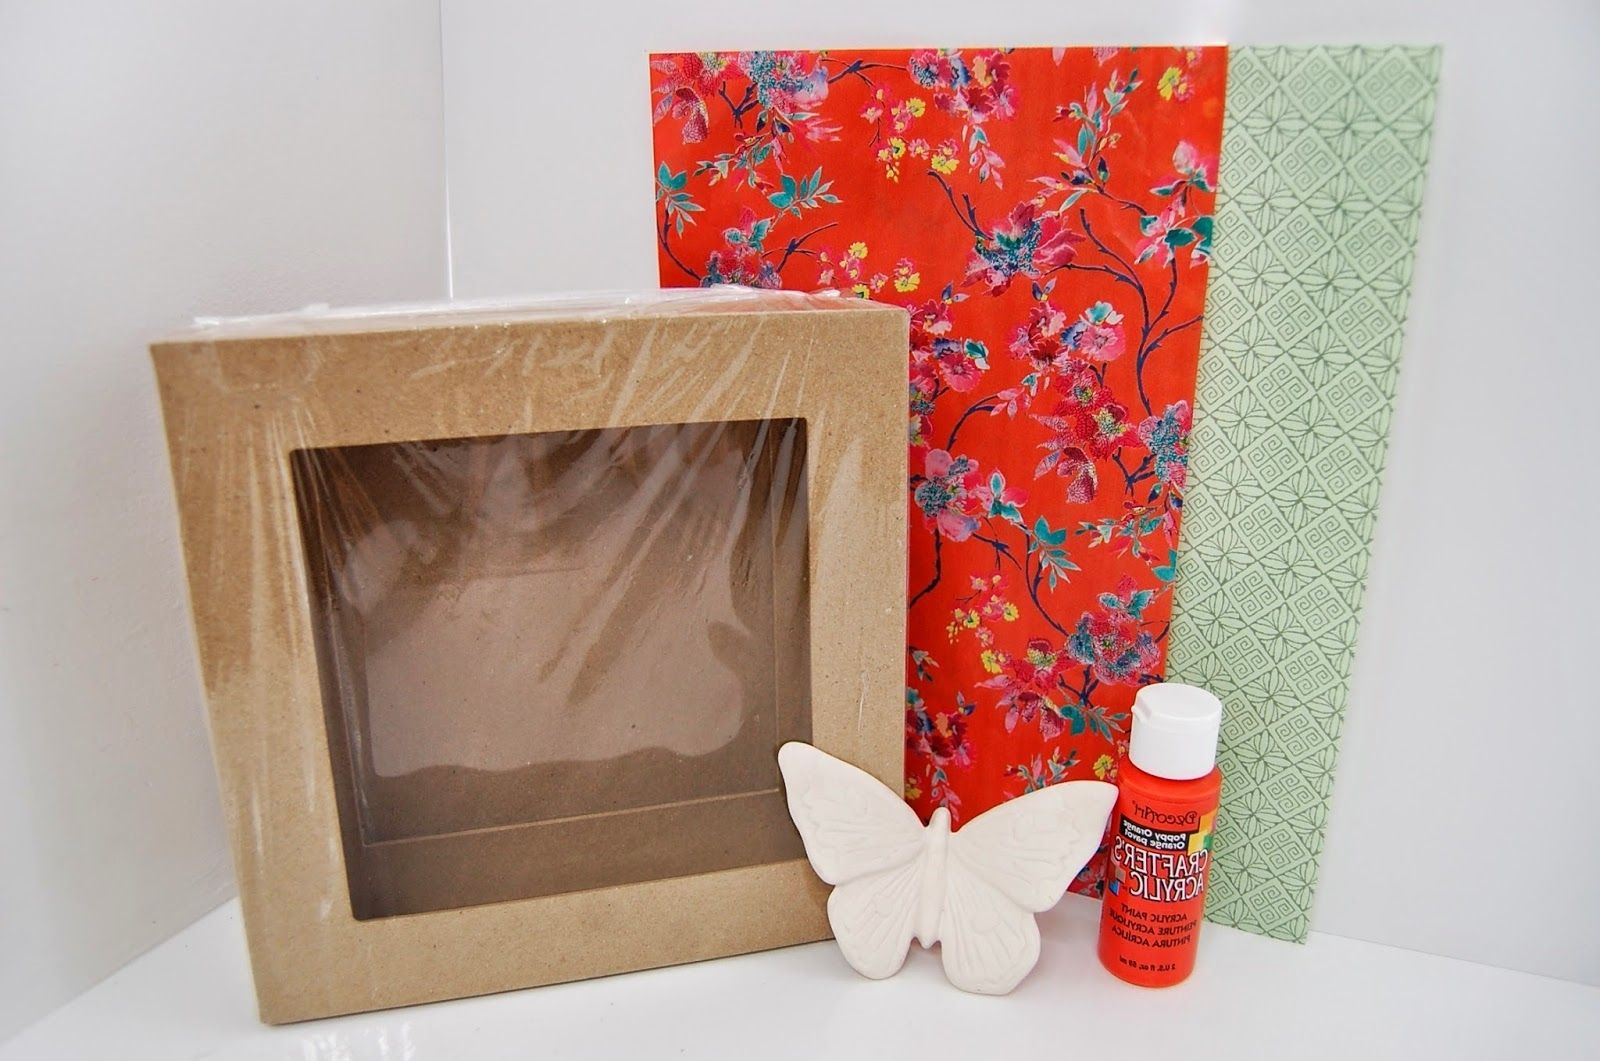 3d Box Frame Decoupage/decopatch Makeover Wall Art Idea Throughout Most Current Decoupage Wall Art (View 7 of 15)